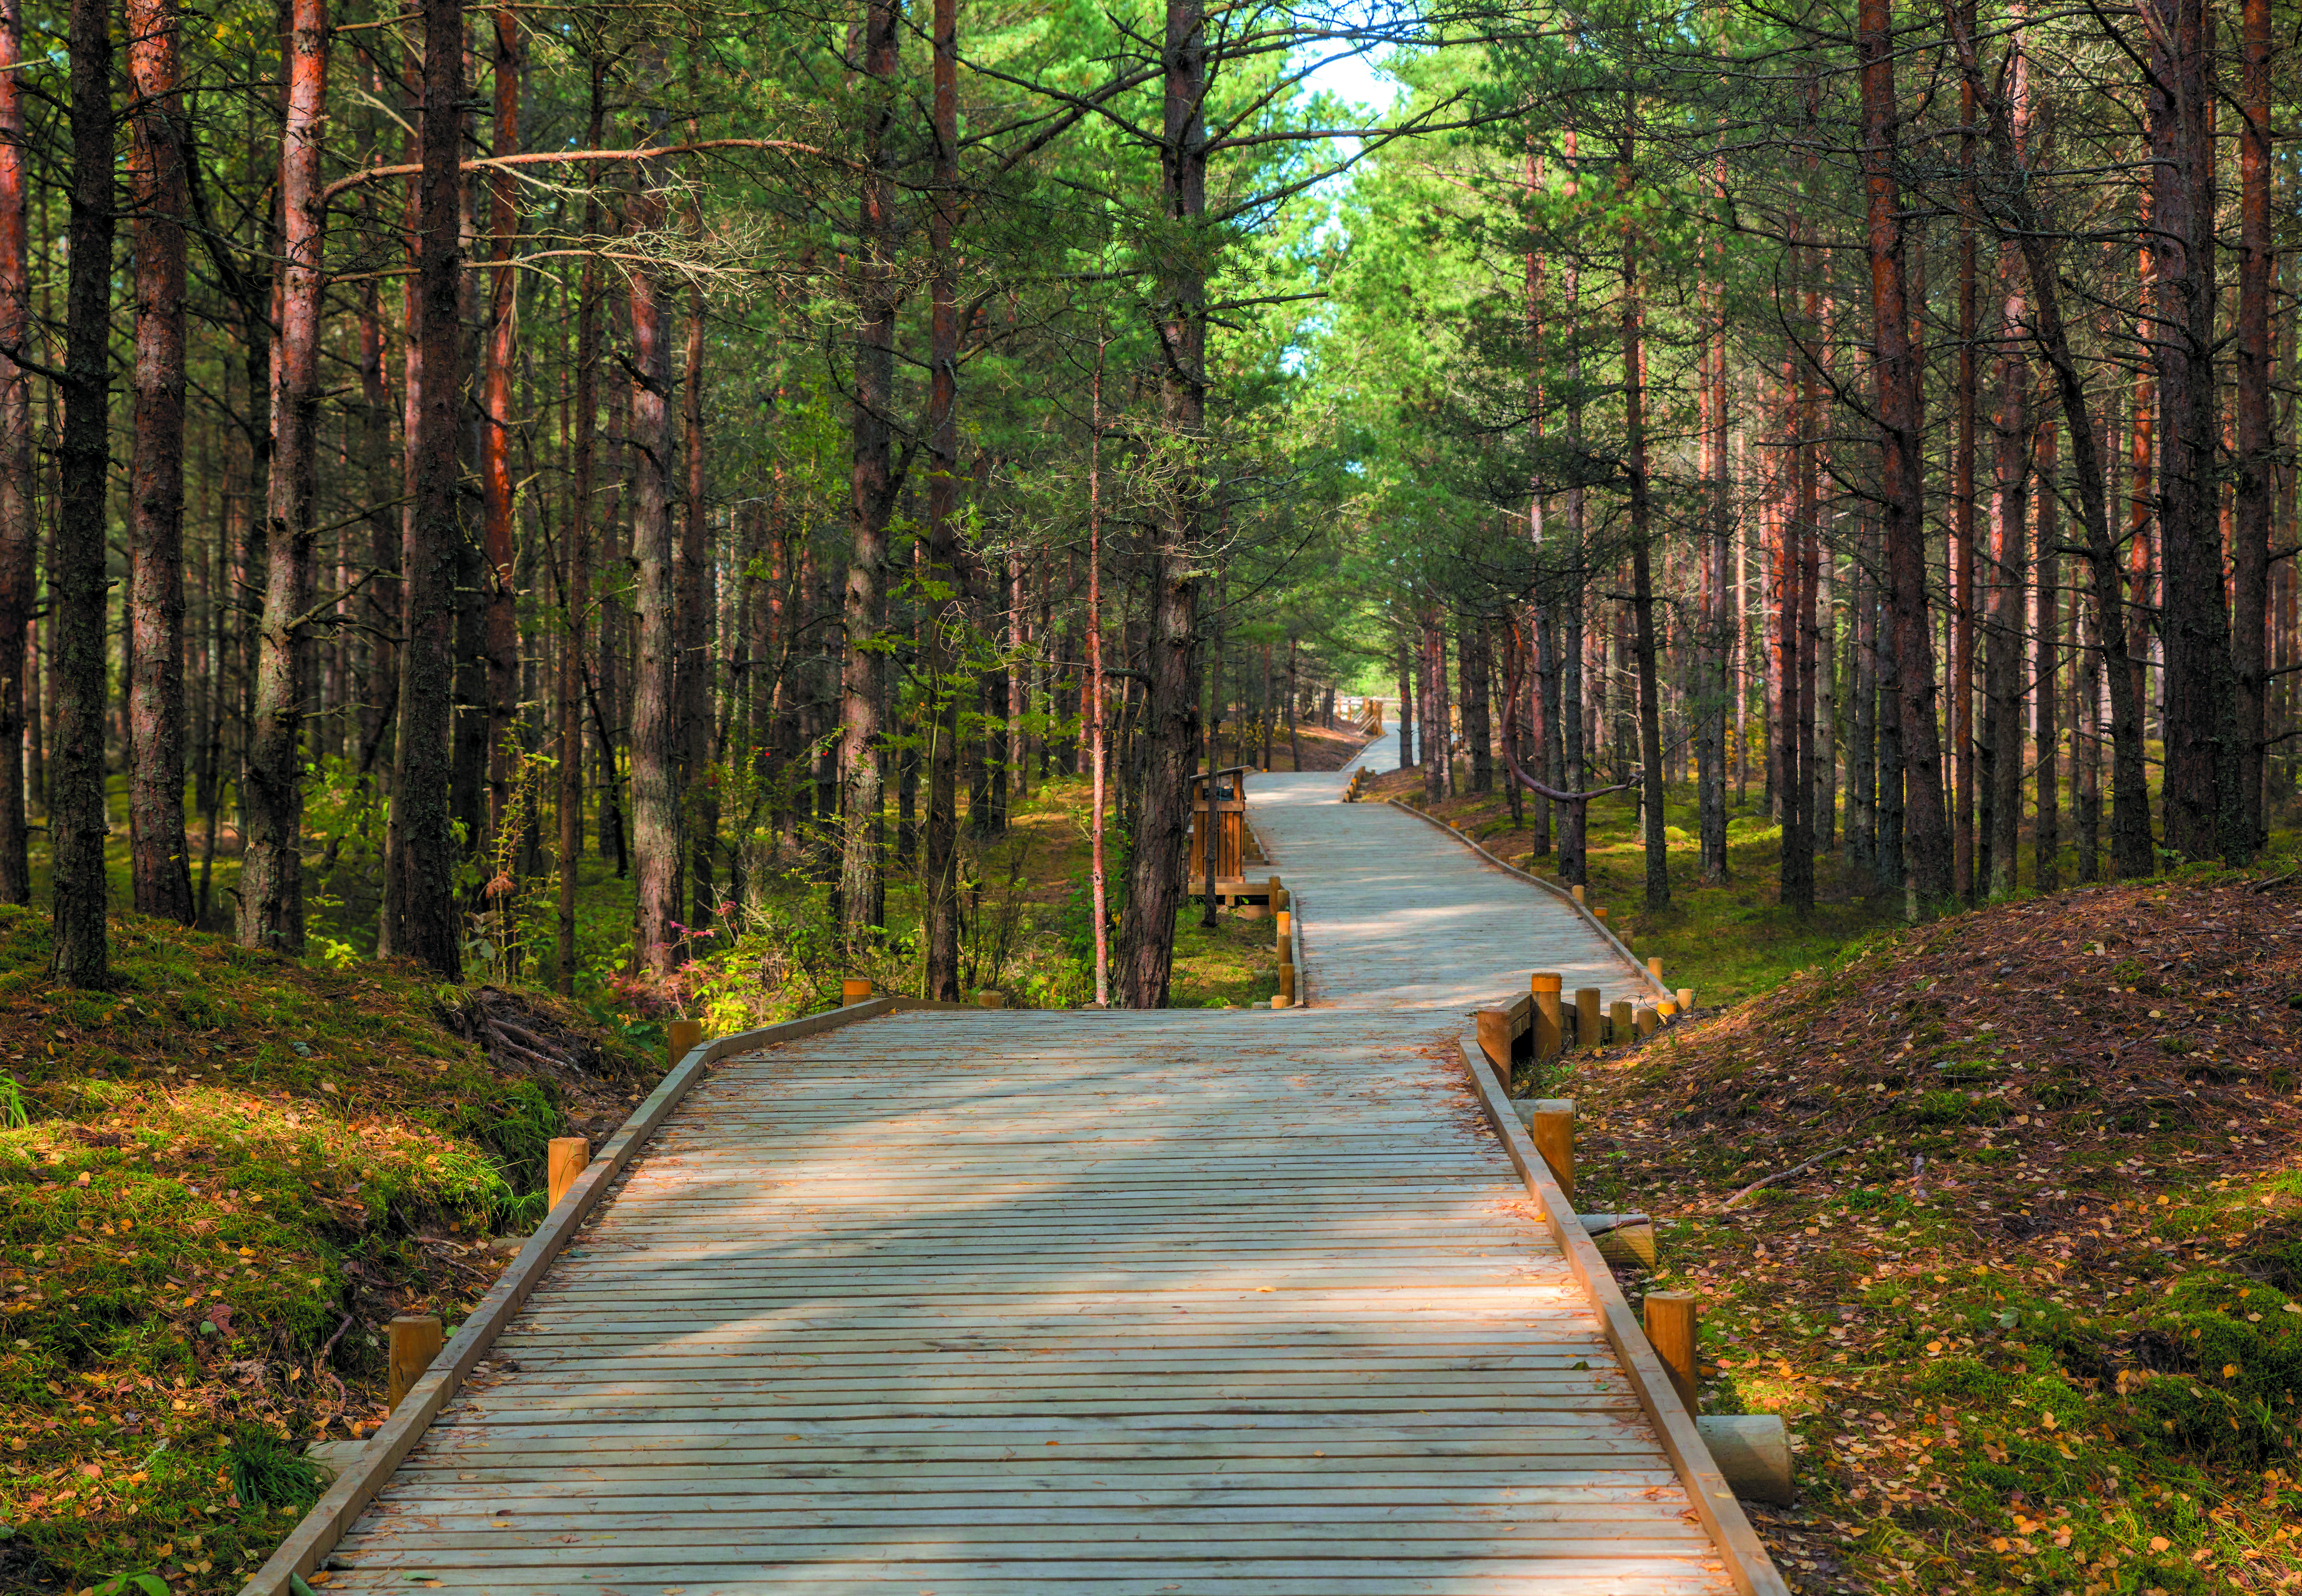 Wooden path winding through a sunny pine forest